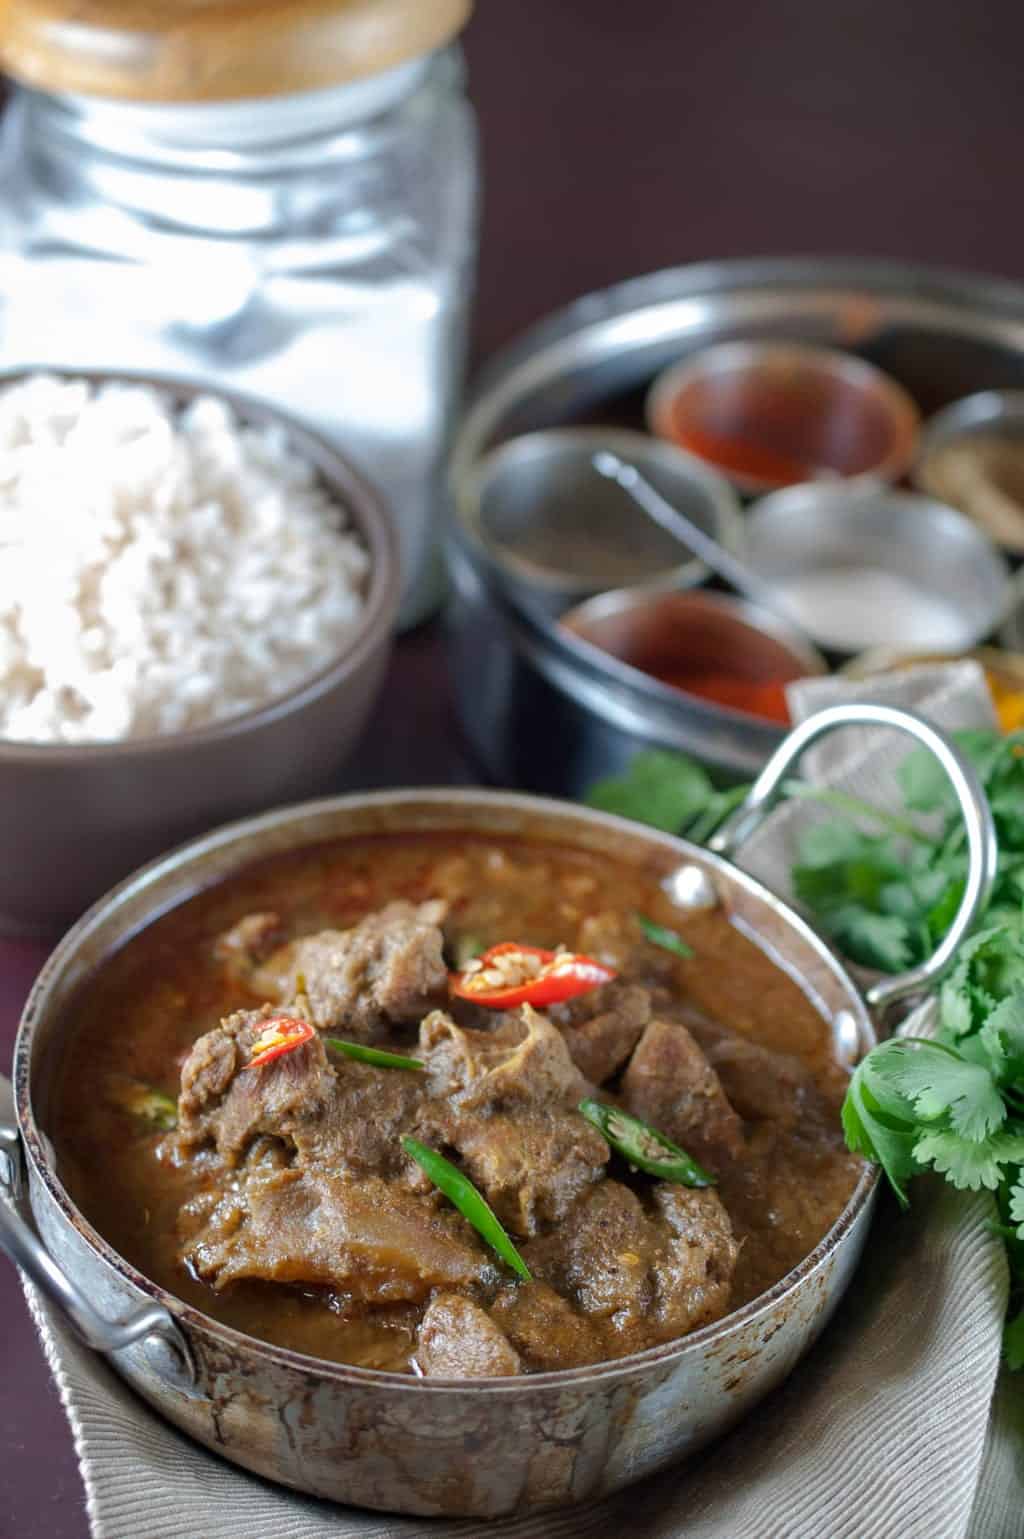 Beef curry Kerala style (Nadan Beef curry) Recipe | A Little Bit of Spice